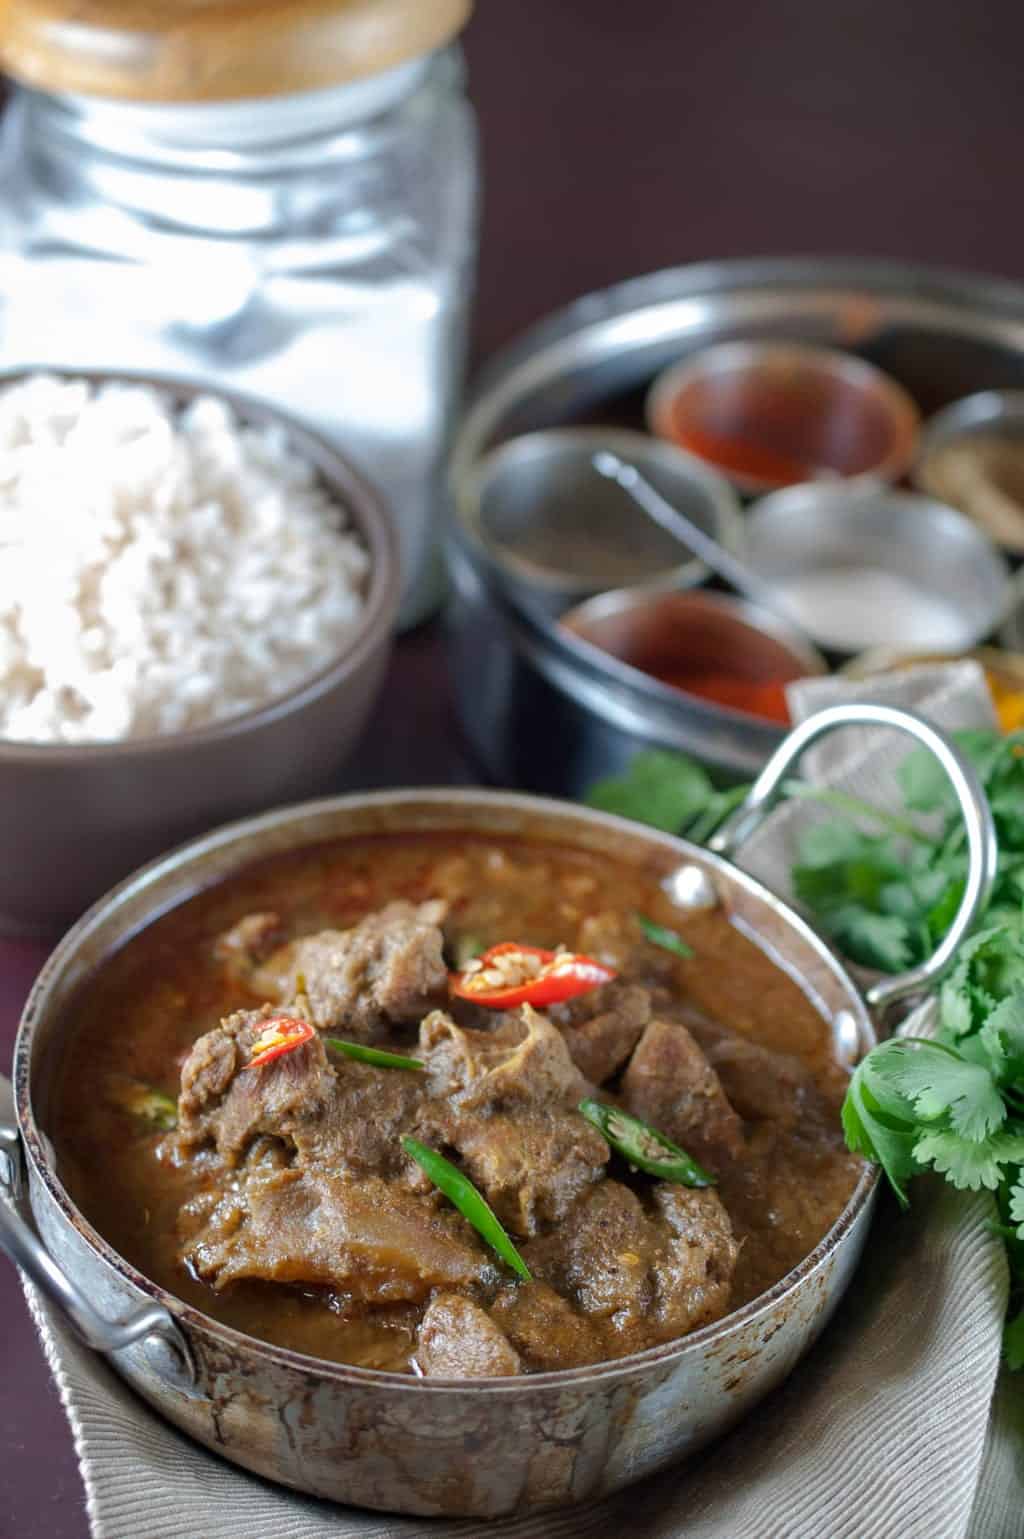 Beef curry Kerala style (Nadan Beef curry) Recipe | A Little Bit of Spice